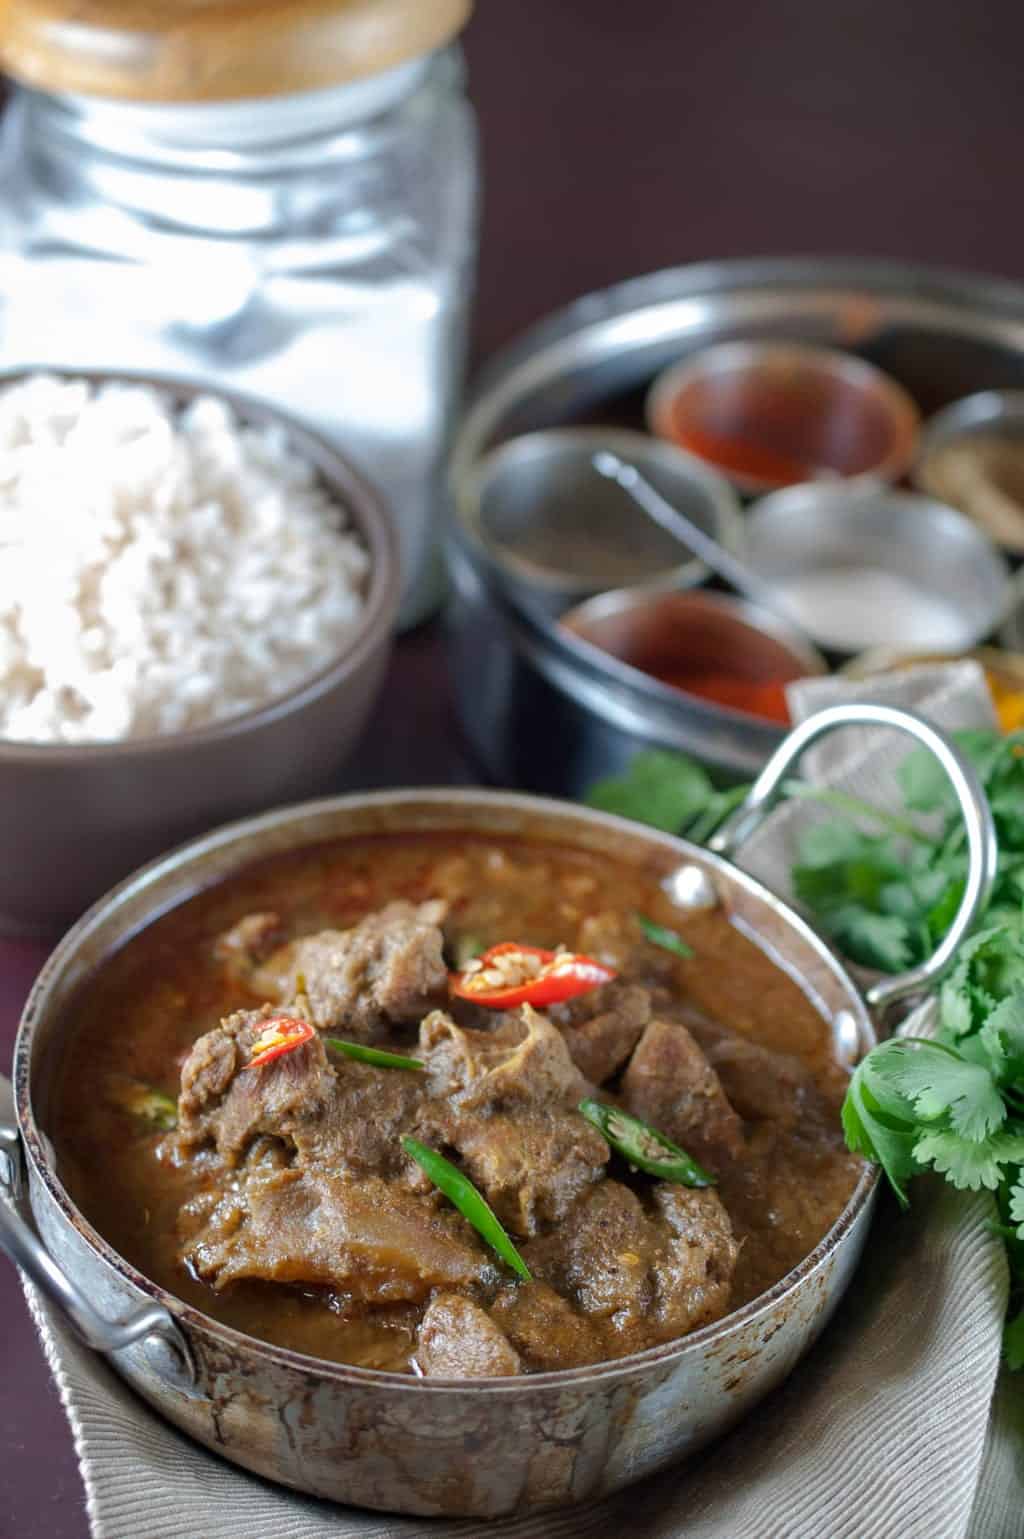 Beef curry Kerala style (Nadan Beef curry) Recipe | A Little Bit of Spice